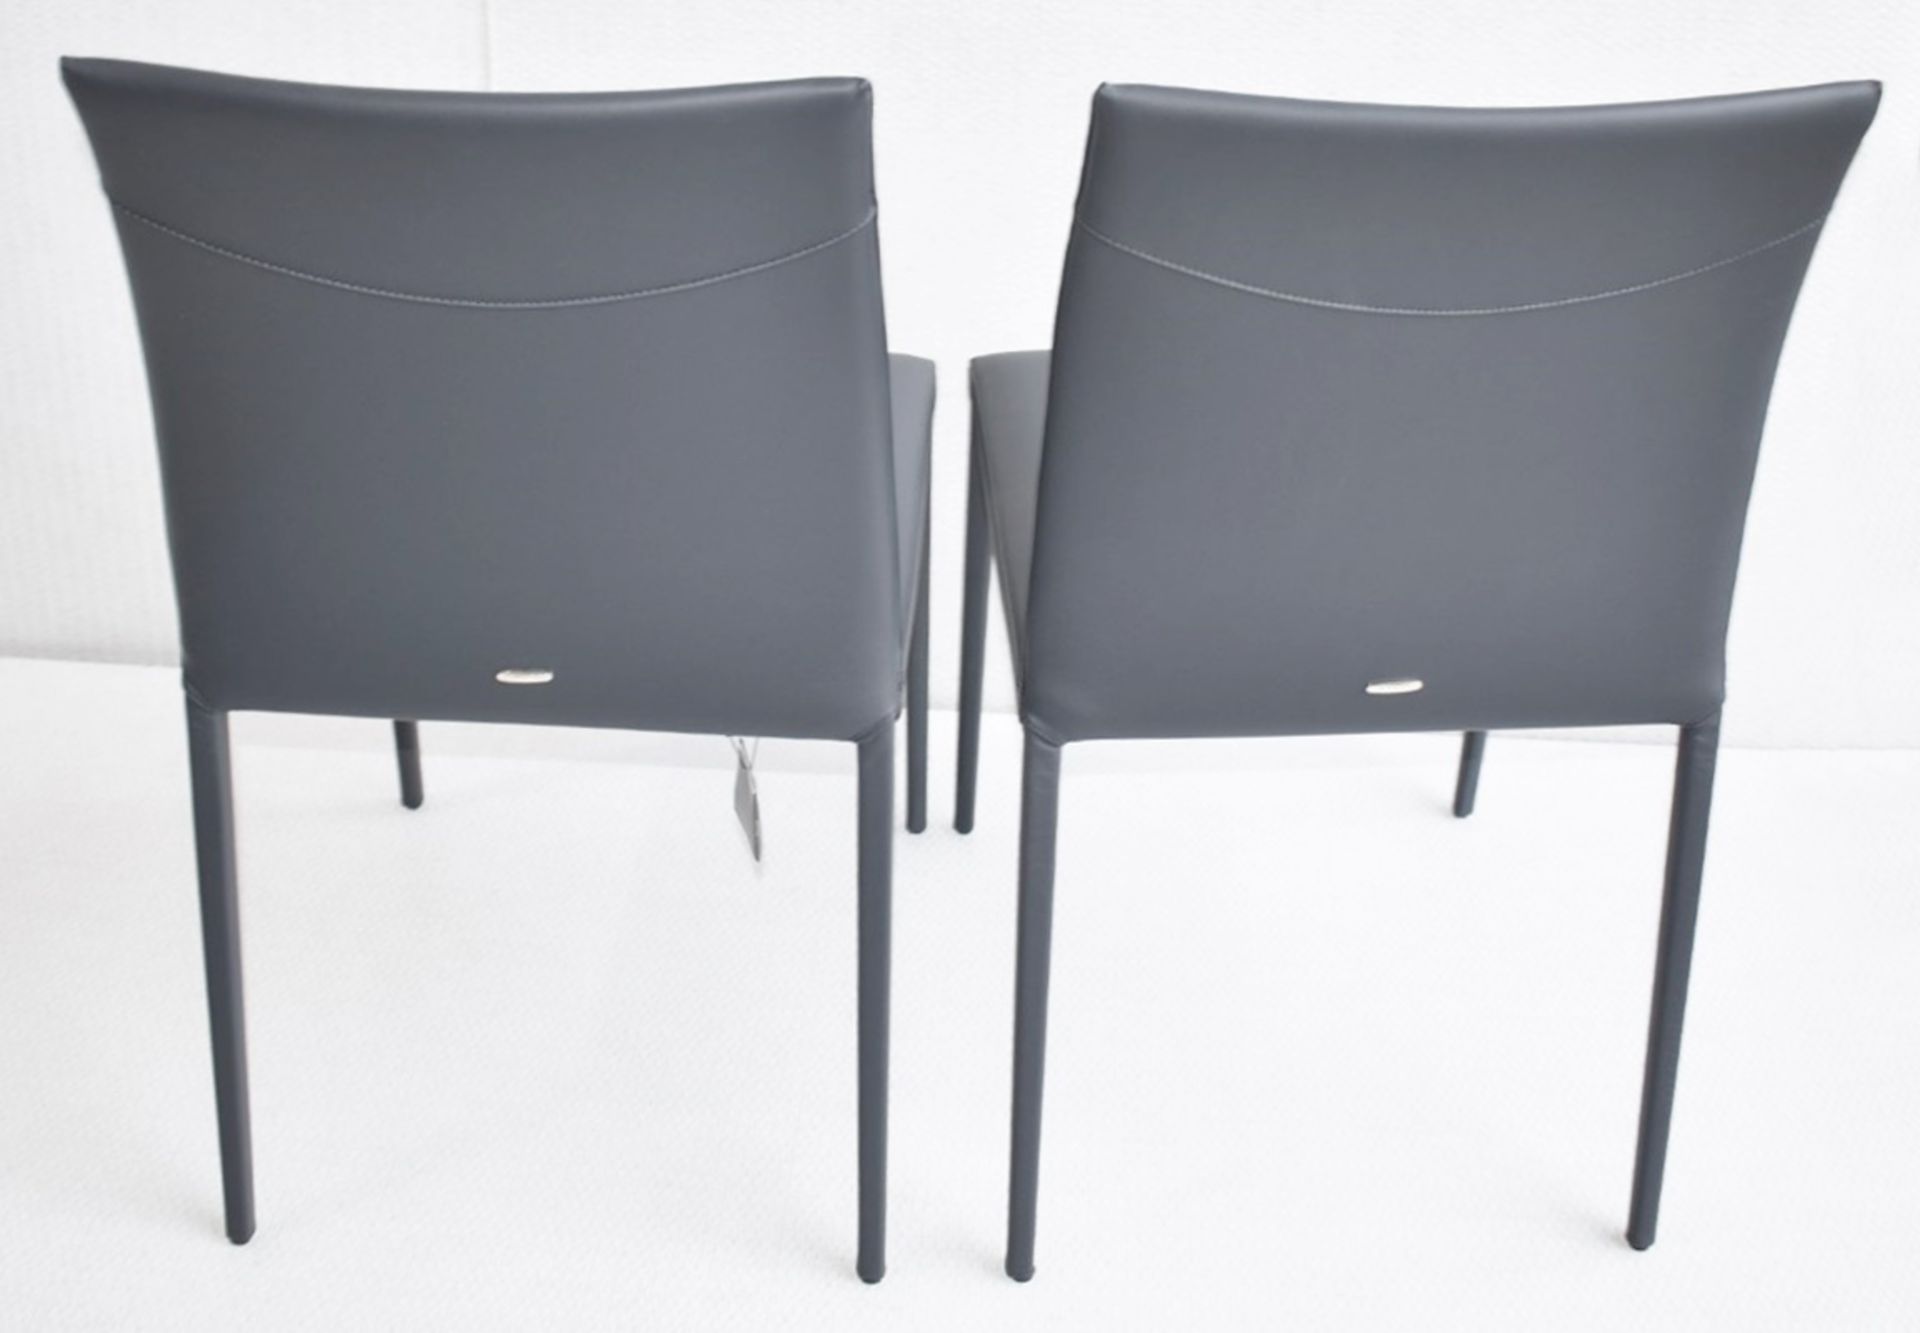 Pair of CATTELAN ITALIA Norma Designer Leather Upholstered Dining Chairs - Original Price £1,258 - Image 8 of 9